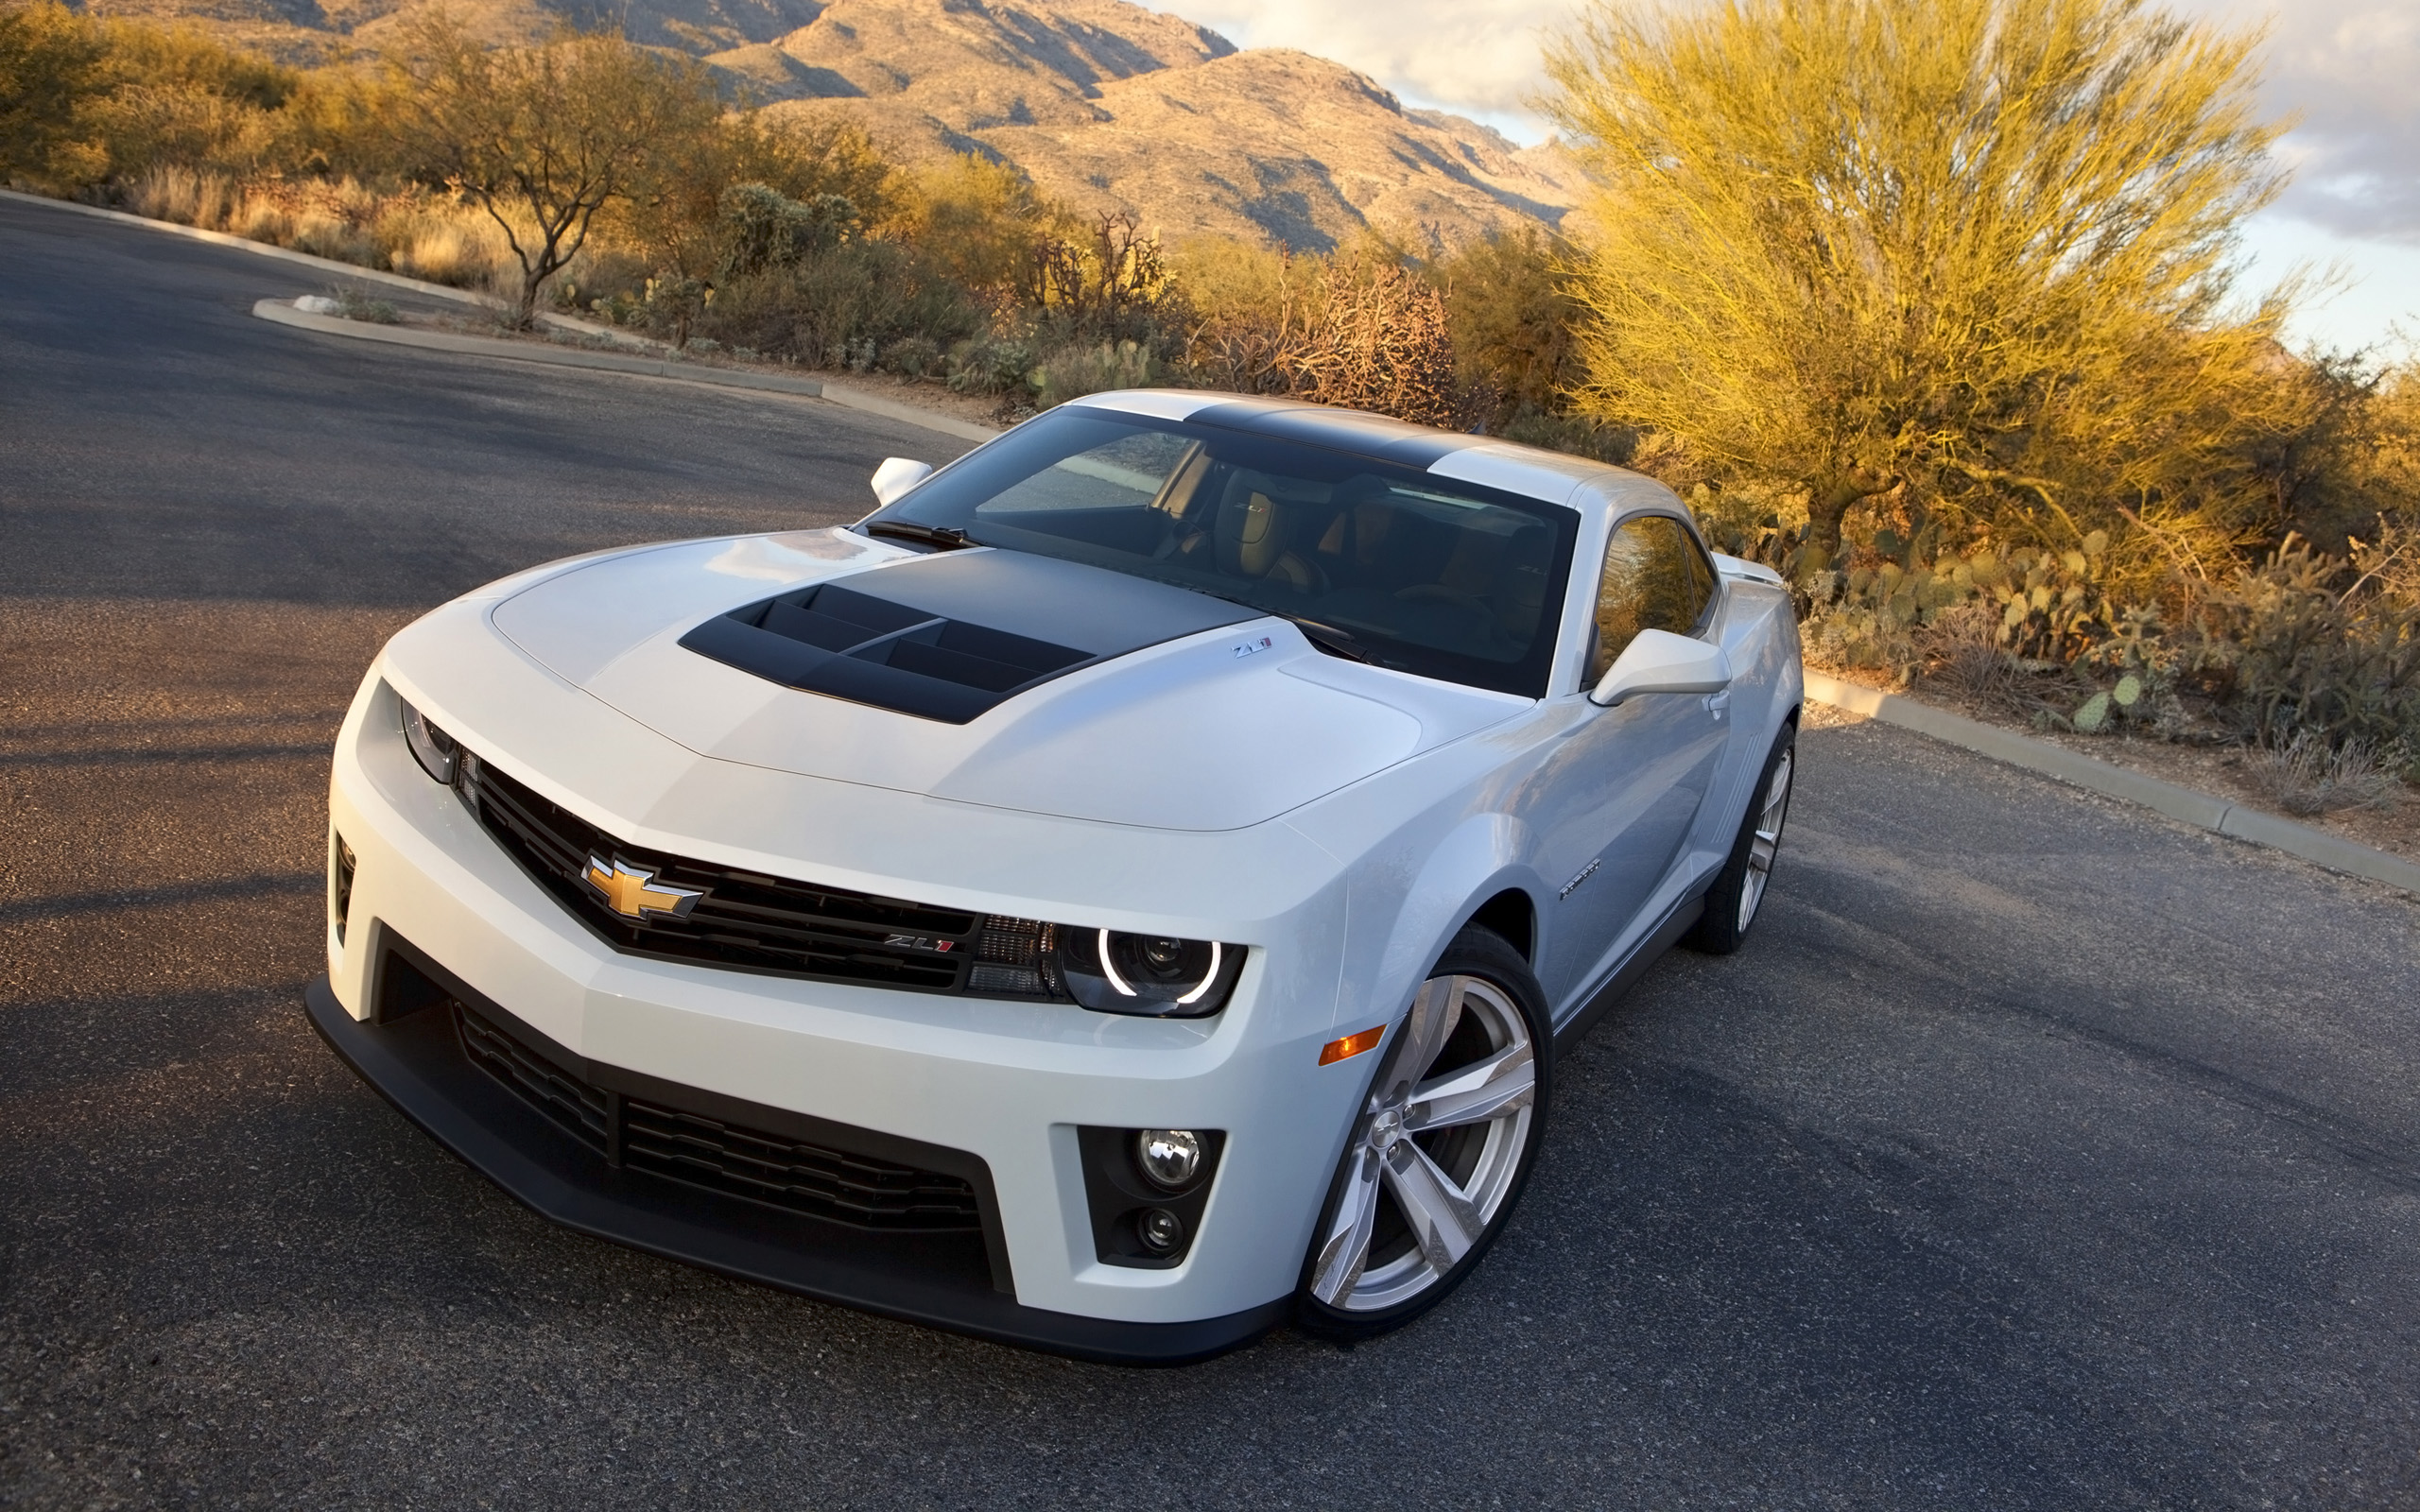 2014 Chevrolet Camaro ZL1 Coupe 2 Wallpaper | HD Car Wallpapers | ID #4366